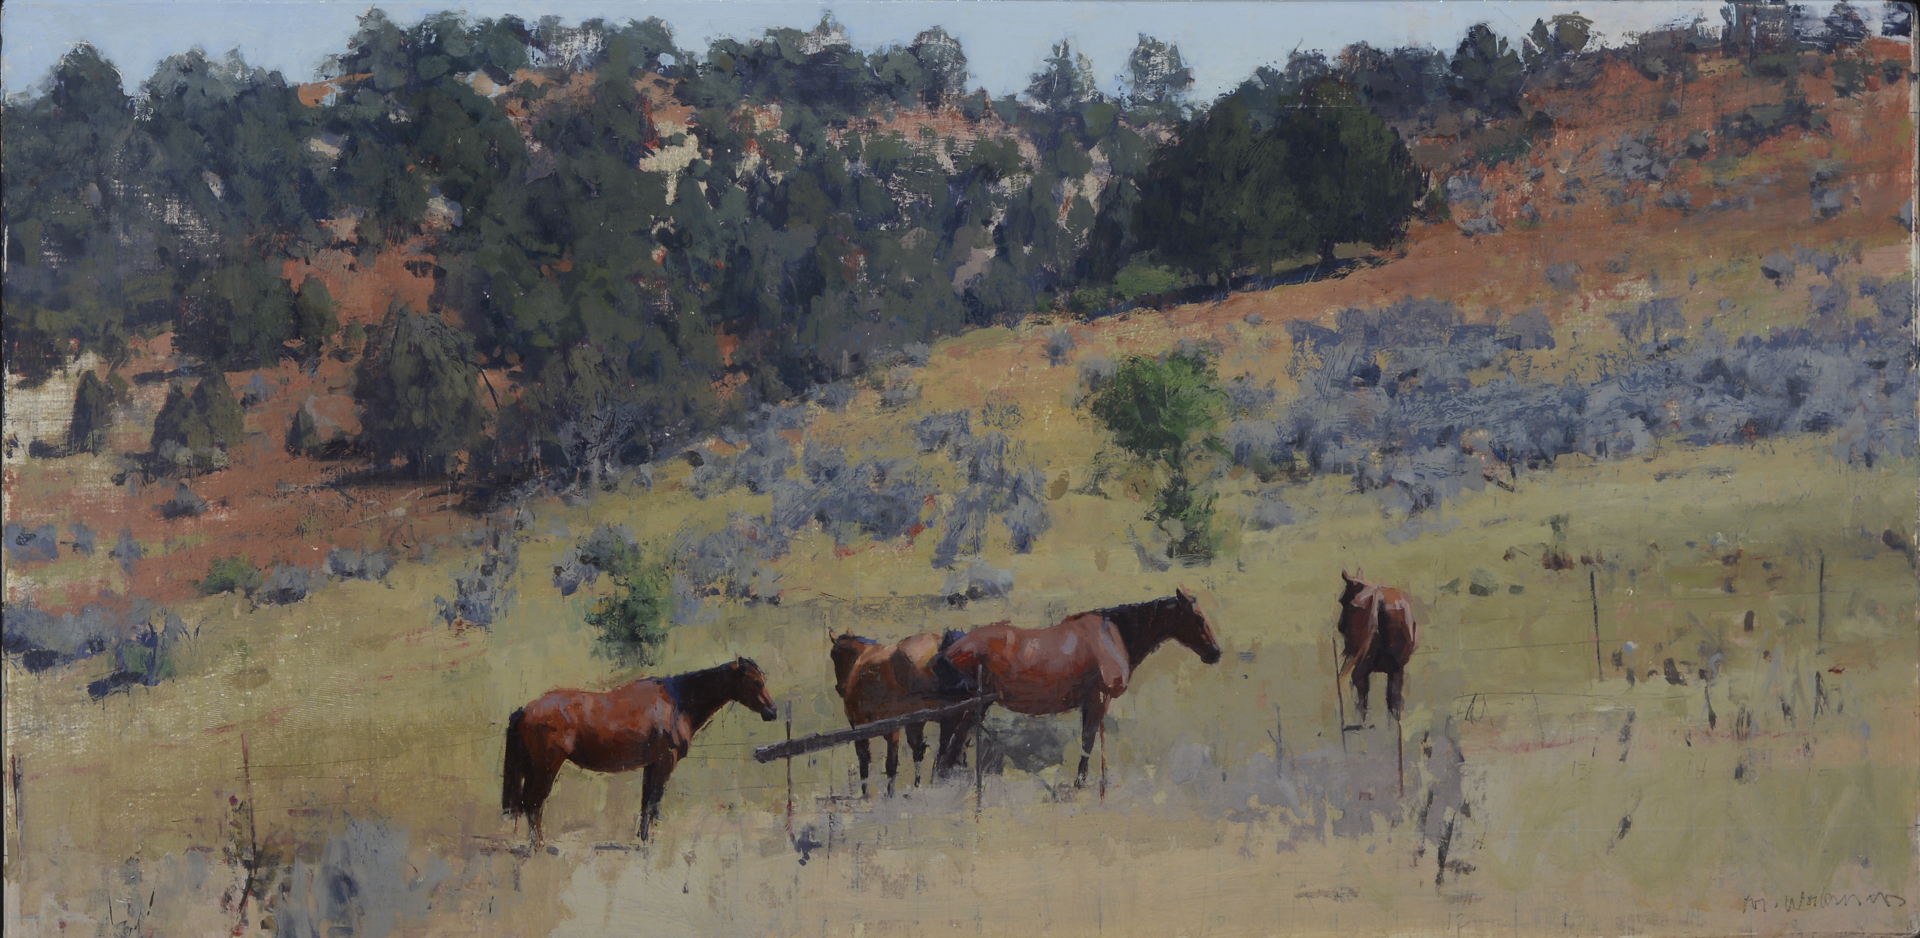 Four Summer Horses #2 by Michael Workman